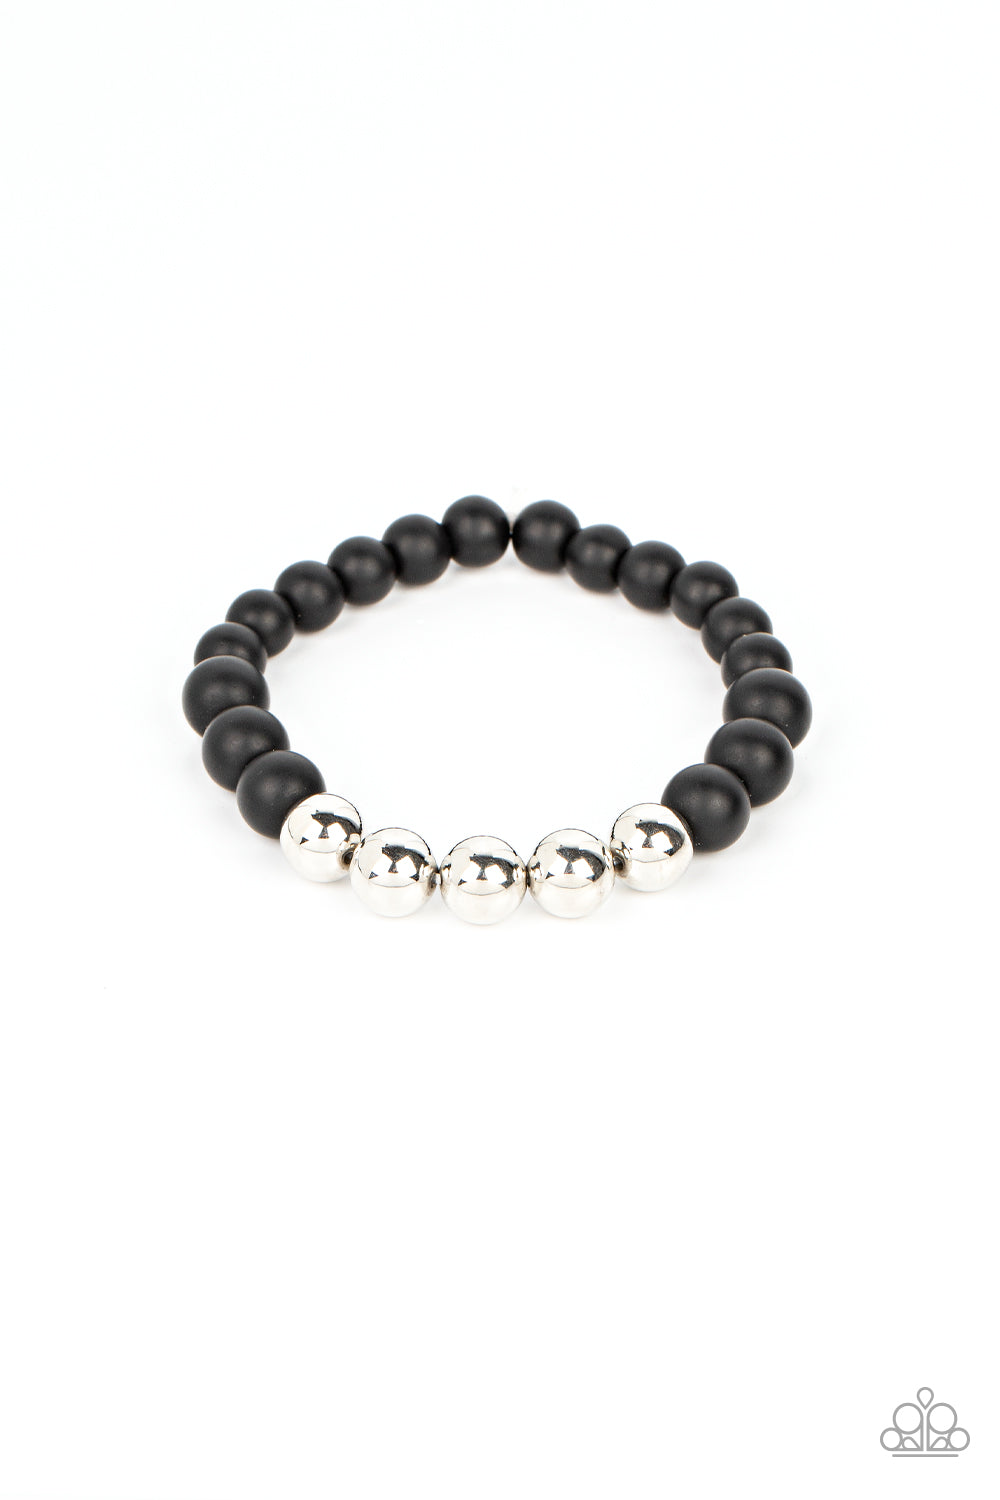 Paparazzi Accessories - METALHEAD in The Clouds - Black Bracelets a section of silver beads joins polished black stone beads along stretchy bands around the wrist, resulting in a metallic edge.  Sold as one individual bracelet.